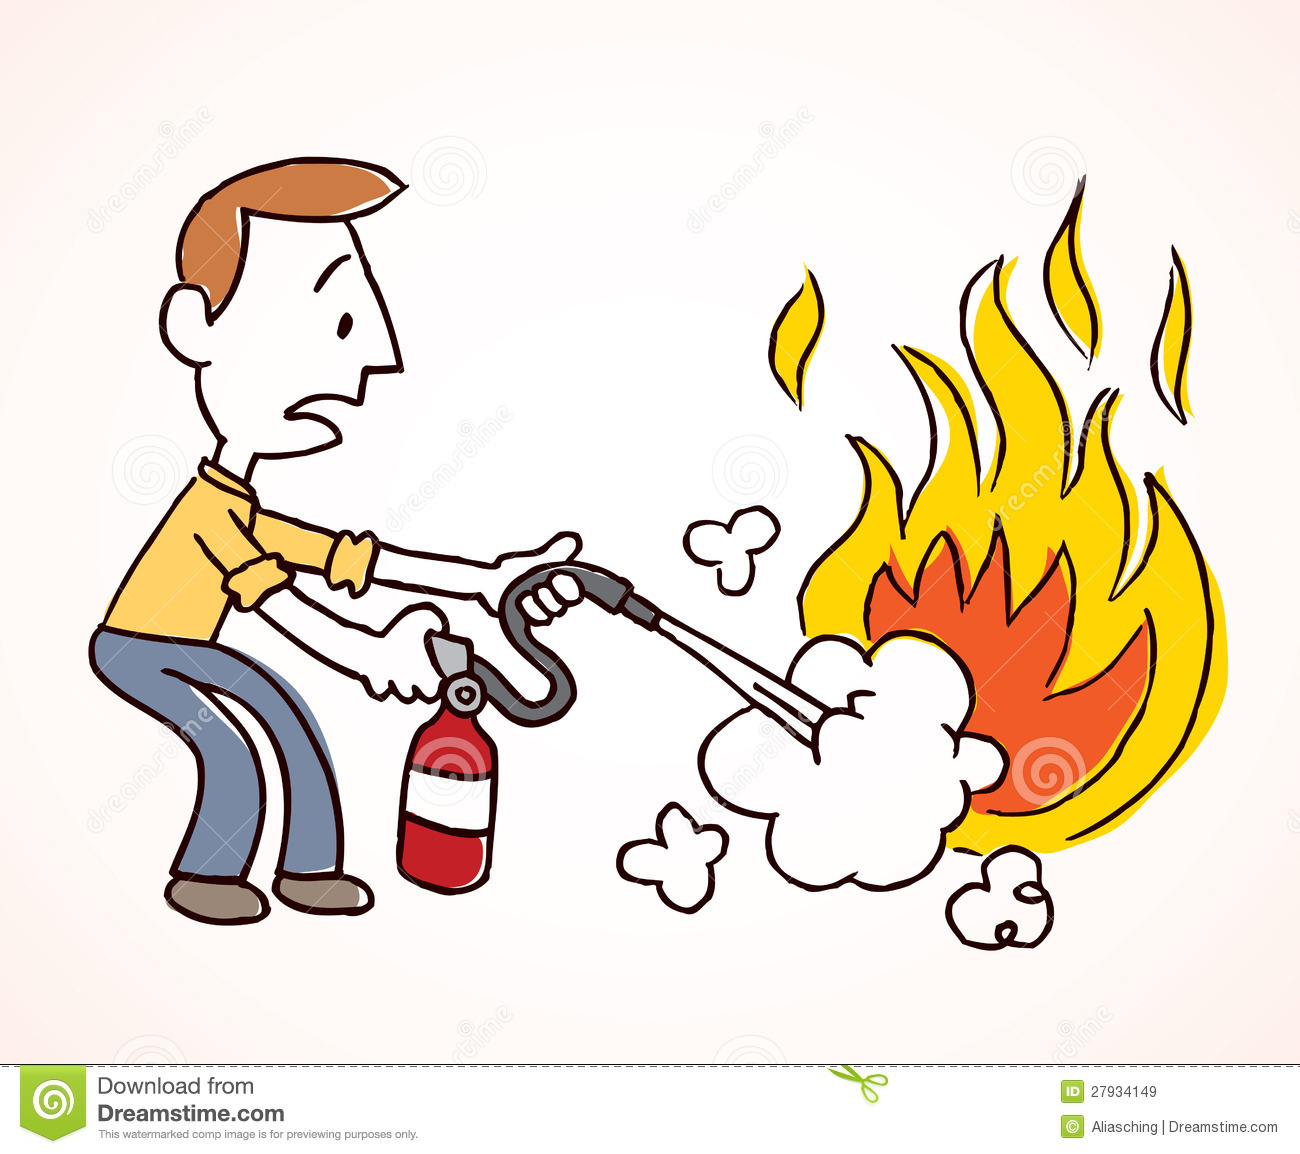 Put out fire clipart.